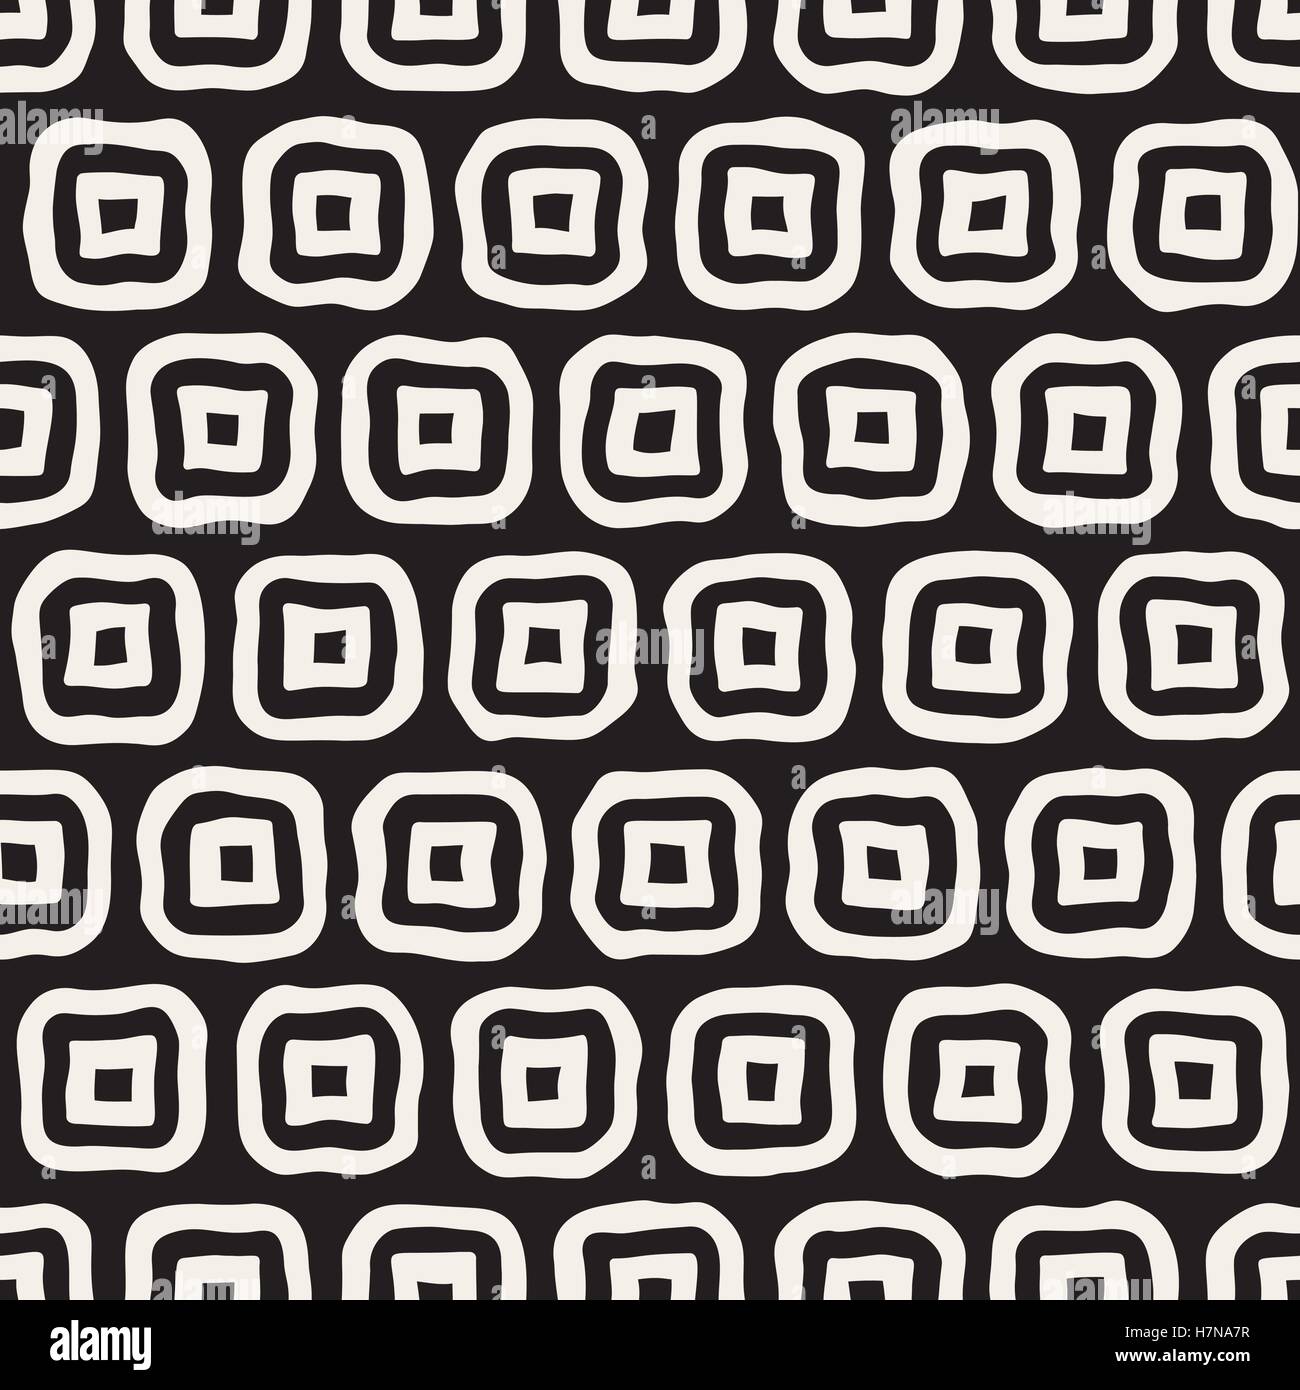 Vector Seamless Black and White Hand Drawn Rounded Rectangles Pattern. Abstract Freehand Background Design Stock Vector